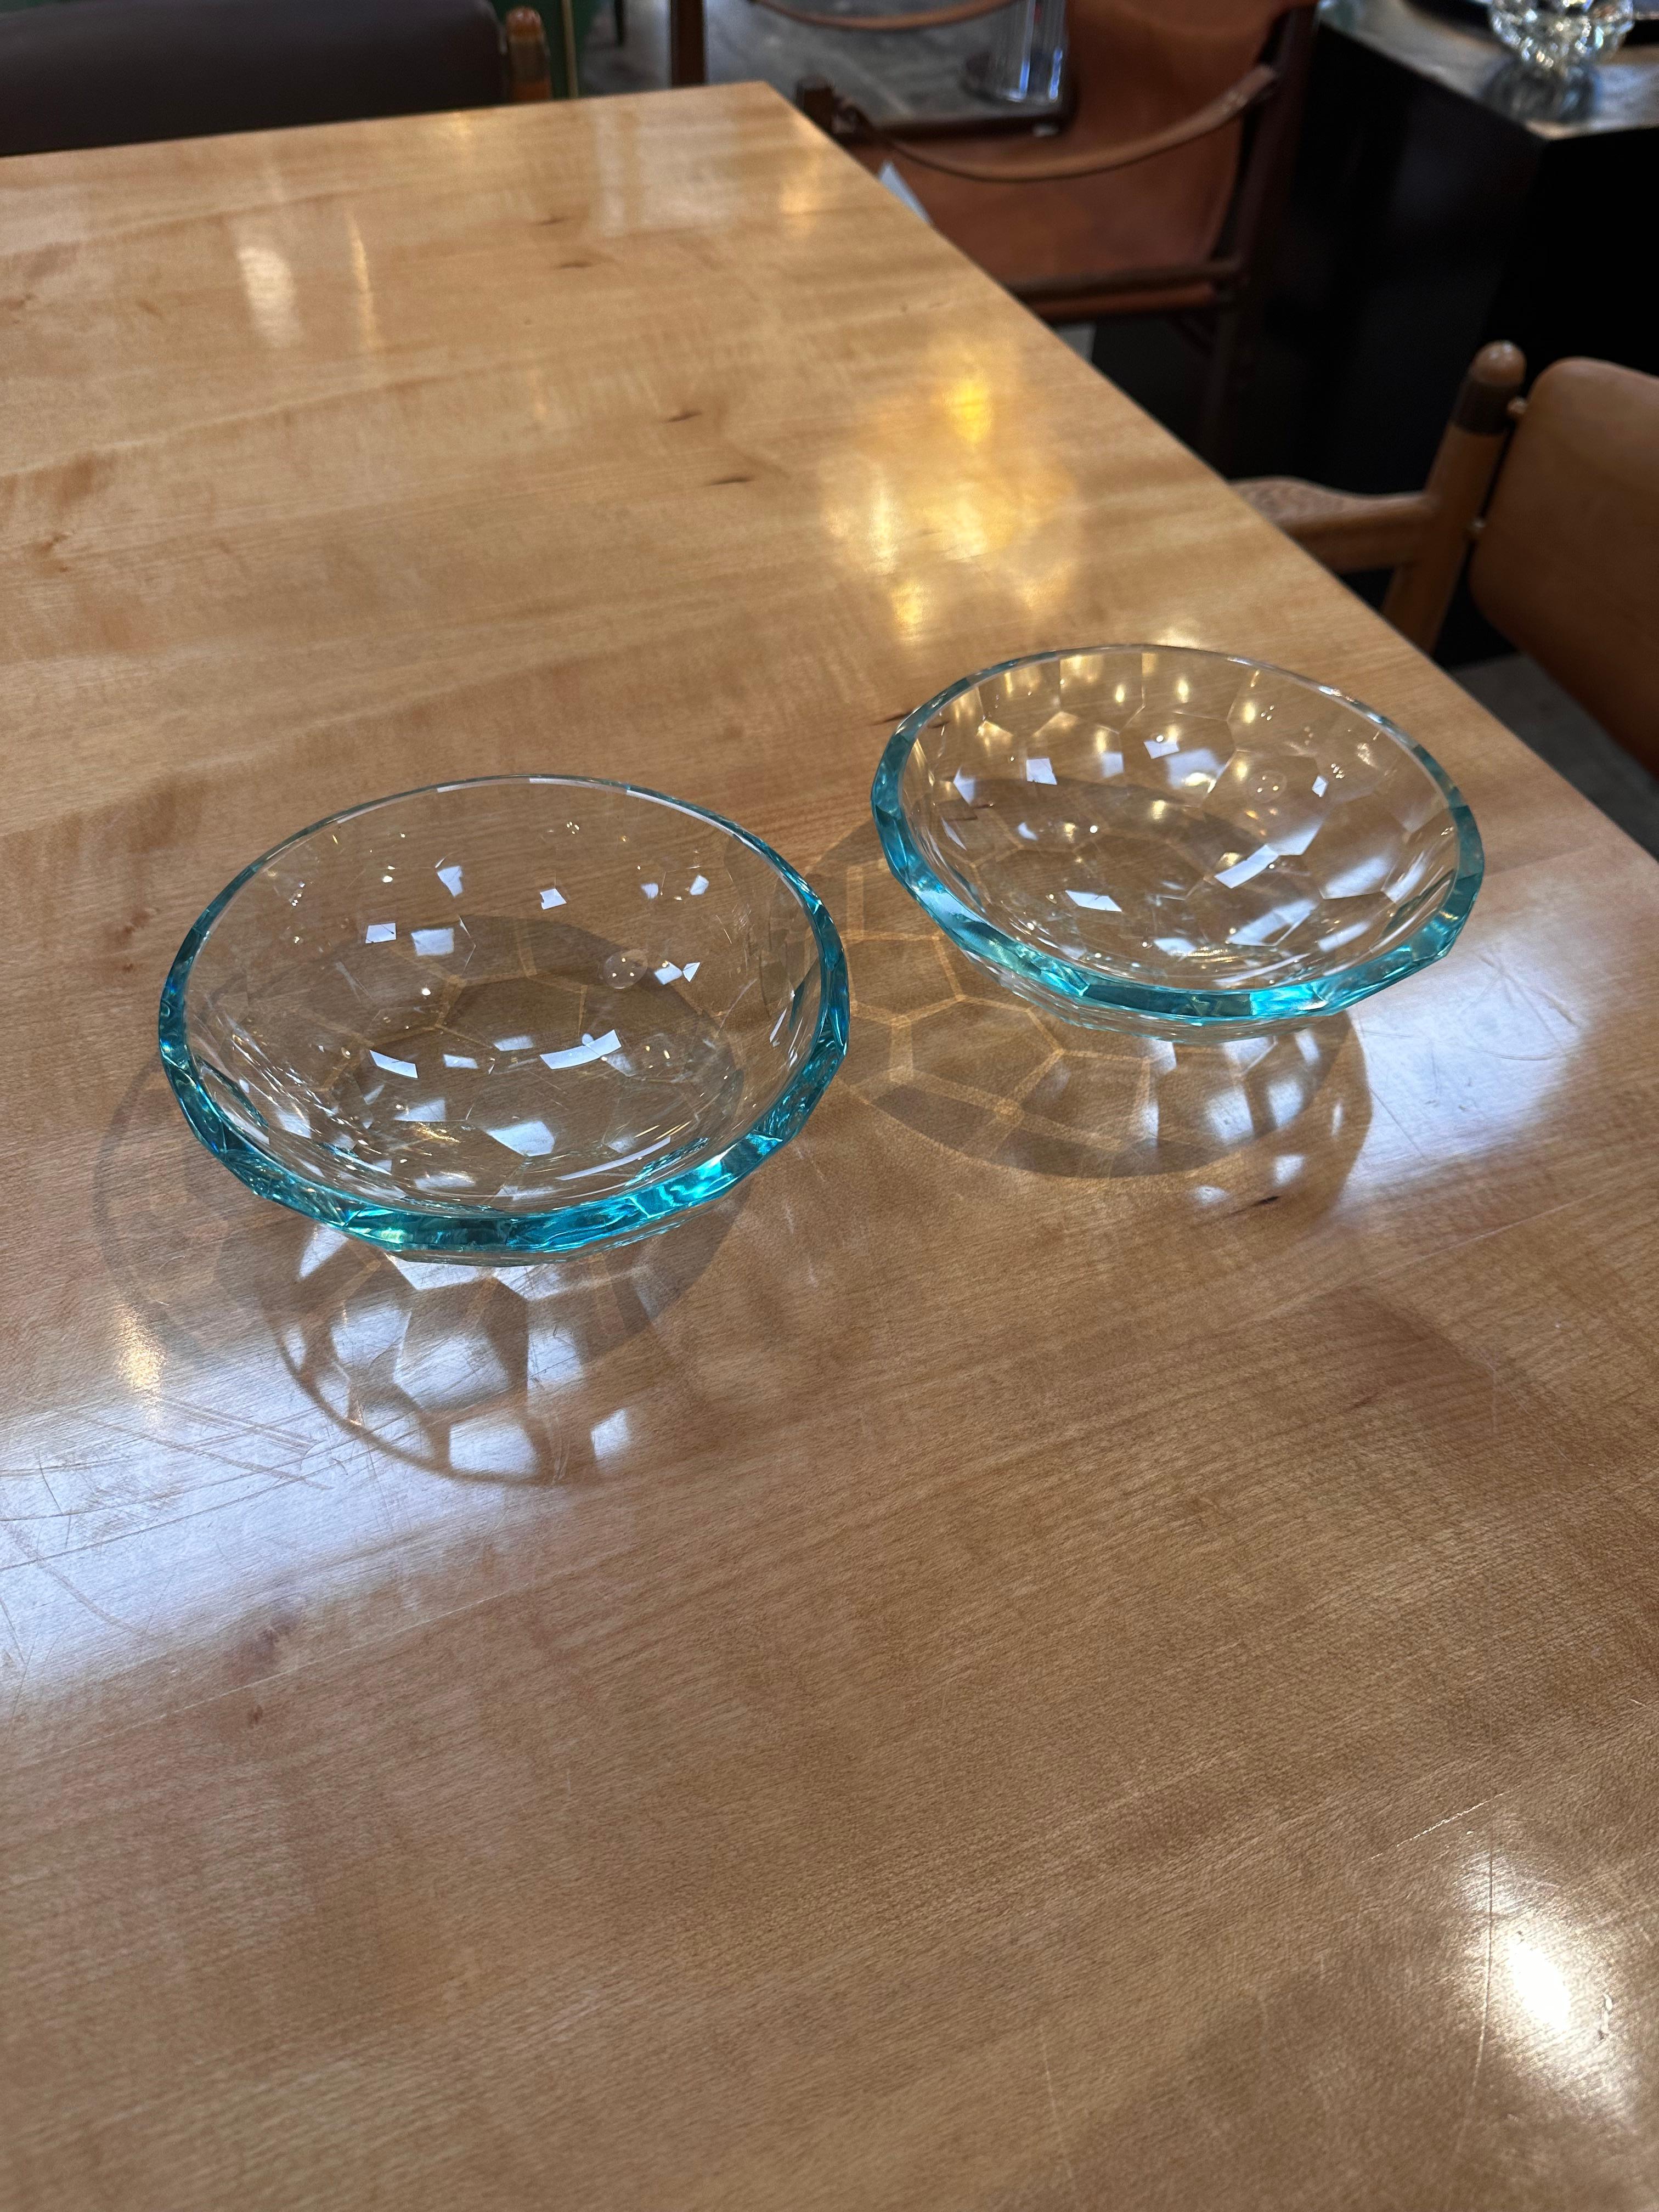 The Pair of 2 Decorative Handmade Glass Bowls is a stylish and artistic addition to any home decor. Handcrafted with care, these glass bowls showcase unique designs and attention to detail. Whether used for serving or as decorative pieces, these